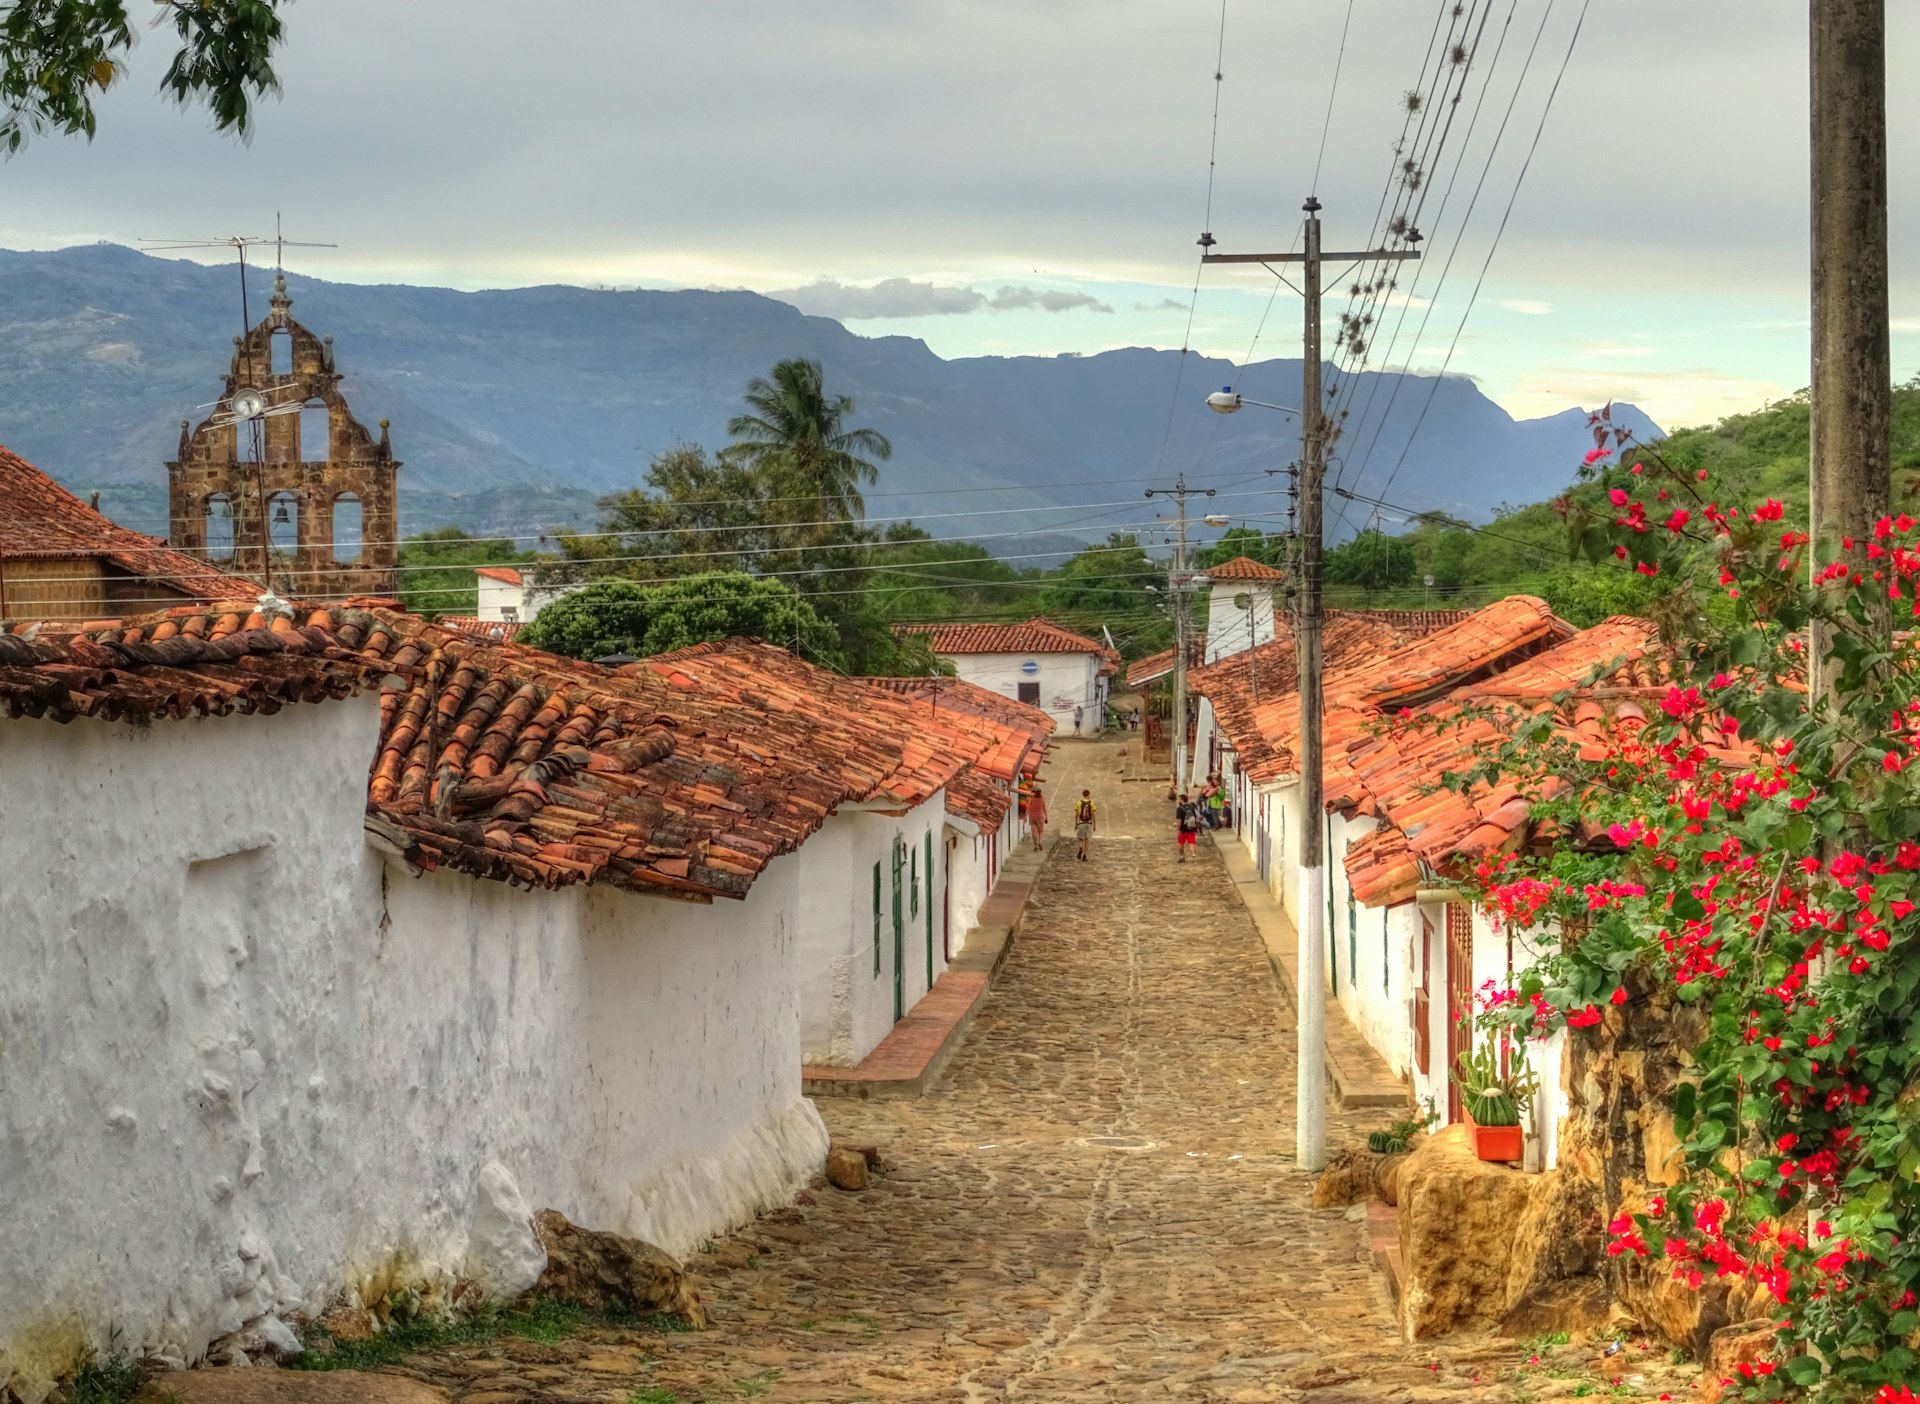 Village street along the route of the Camino Real, Colombia